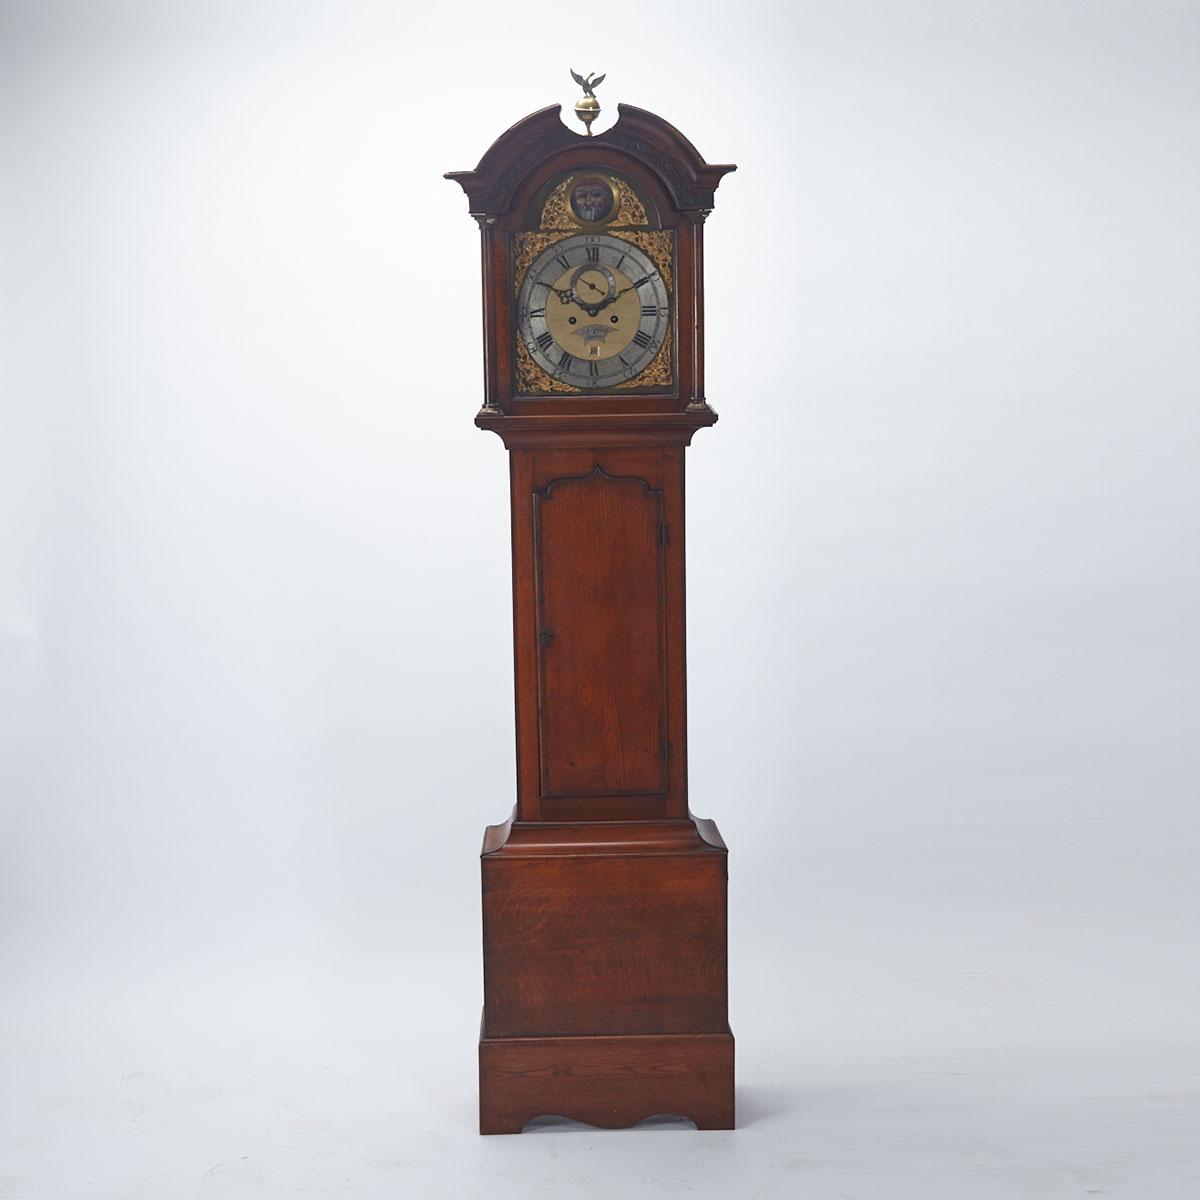 English Oak Tall Case Clock with Animated Dial, Richard Bullock, Ellesmore, early 19th century